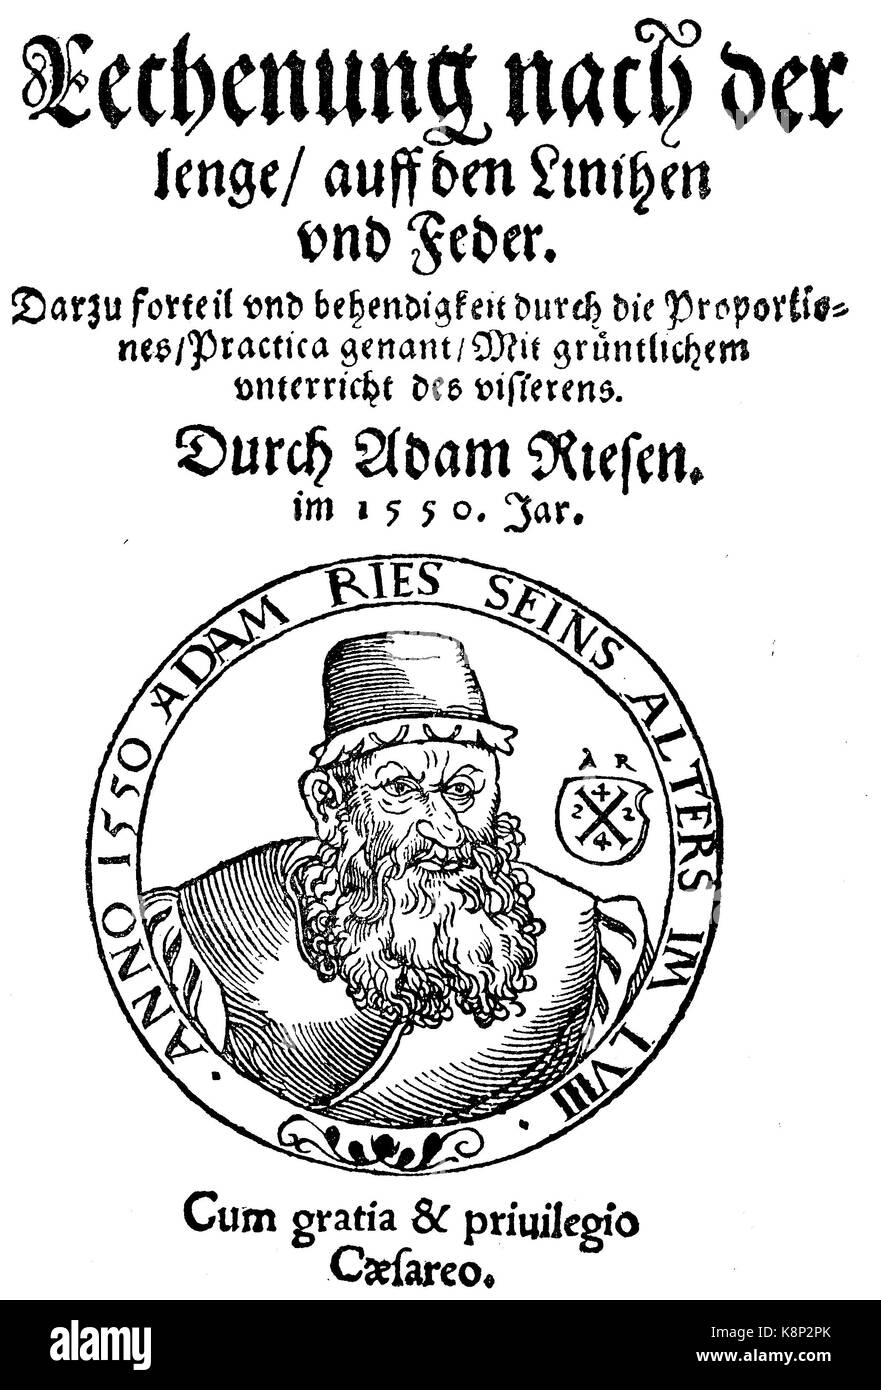 Adam Ries, Adam Riese, 1492 - 1559,s a German mathematician, 1550, Titel des Buches Rechnung nach der lenge, digital improved reproduction of a woodcut, published in the 19th century Stock Photo